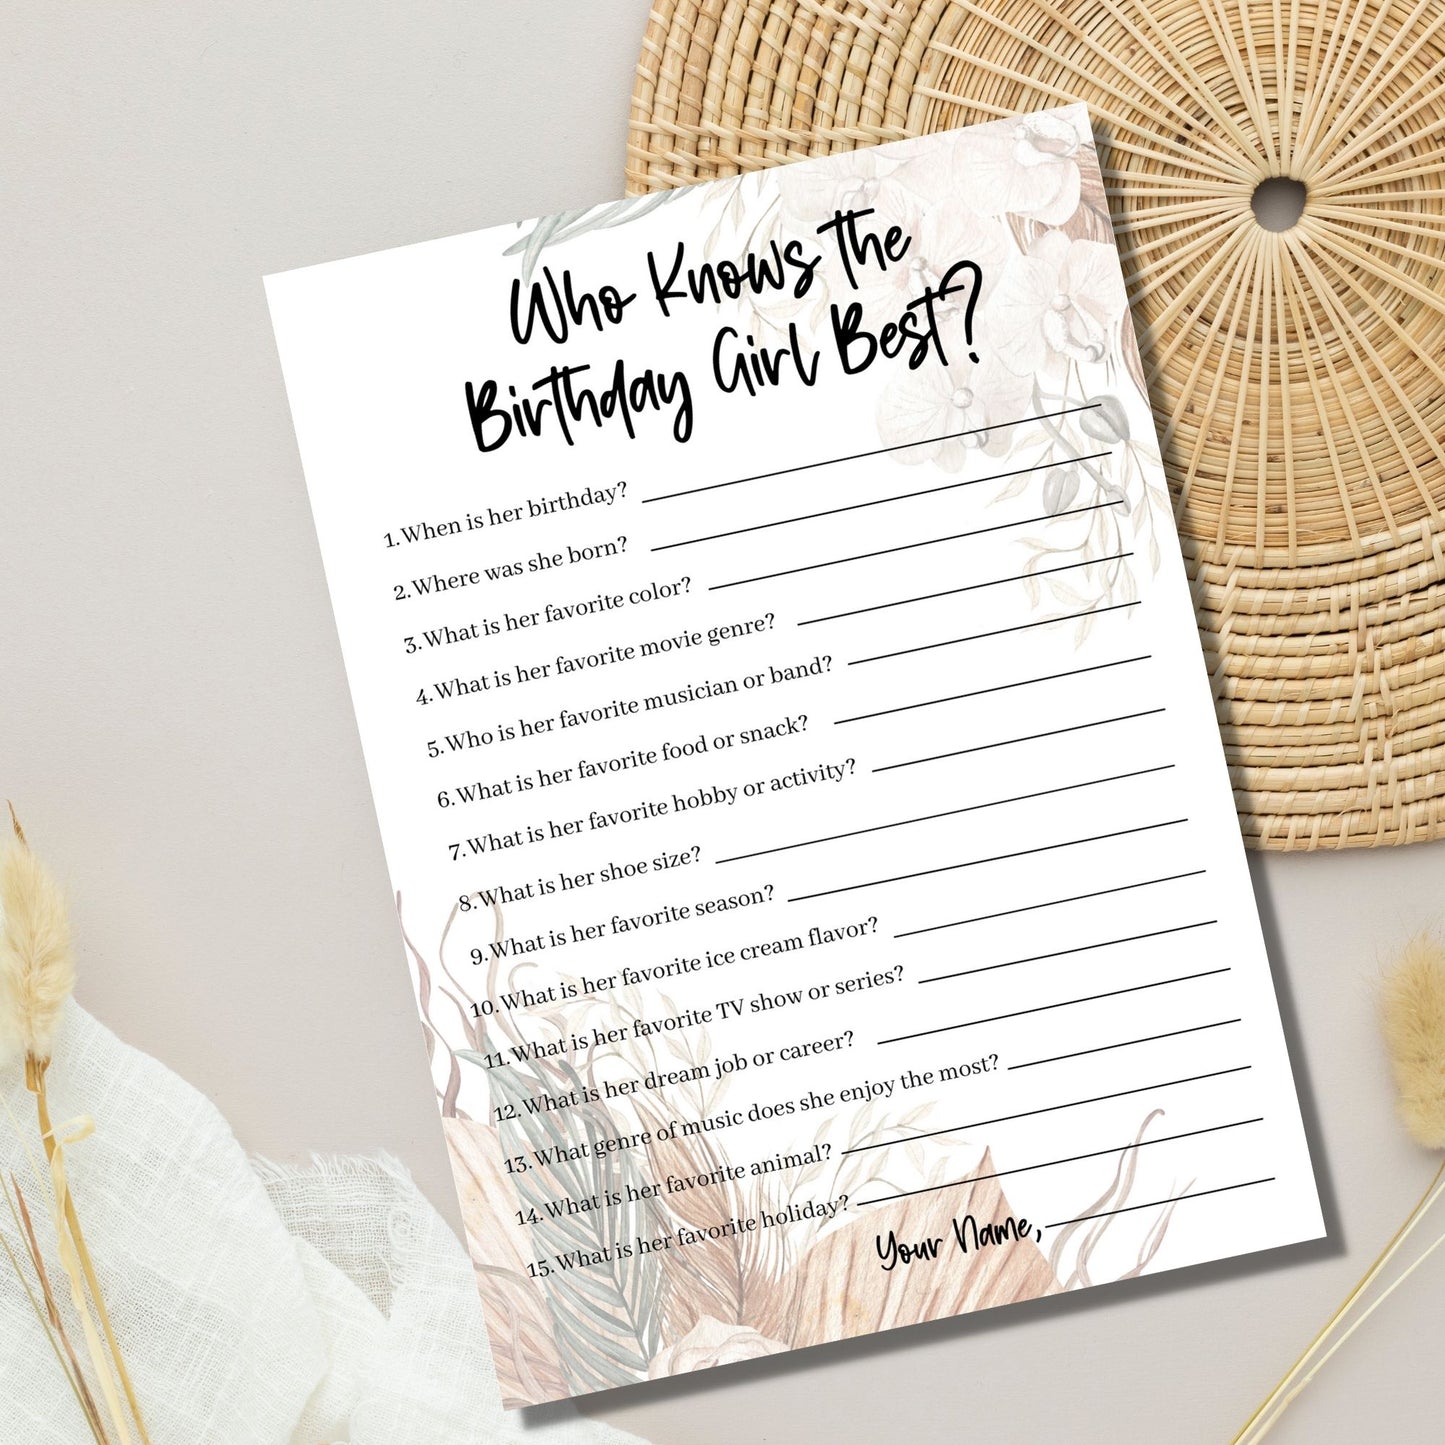 Who Knows the Birthday Girl Best Printable Game